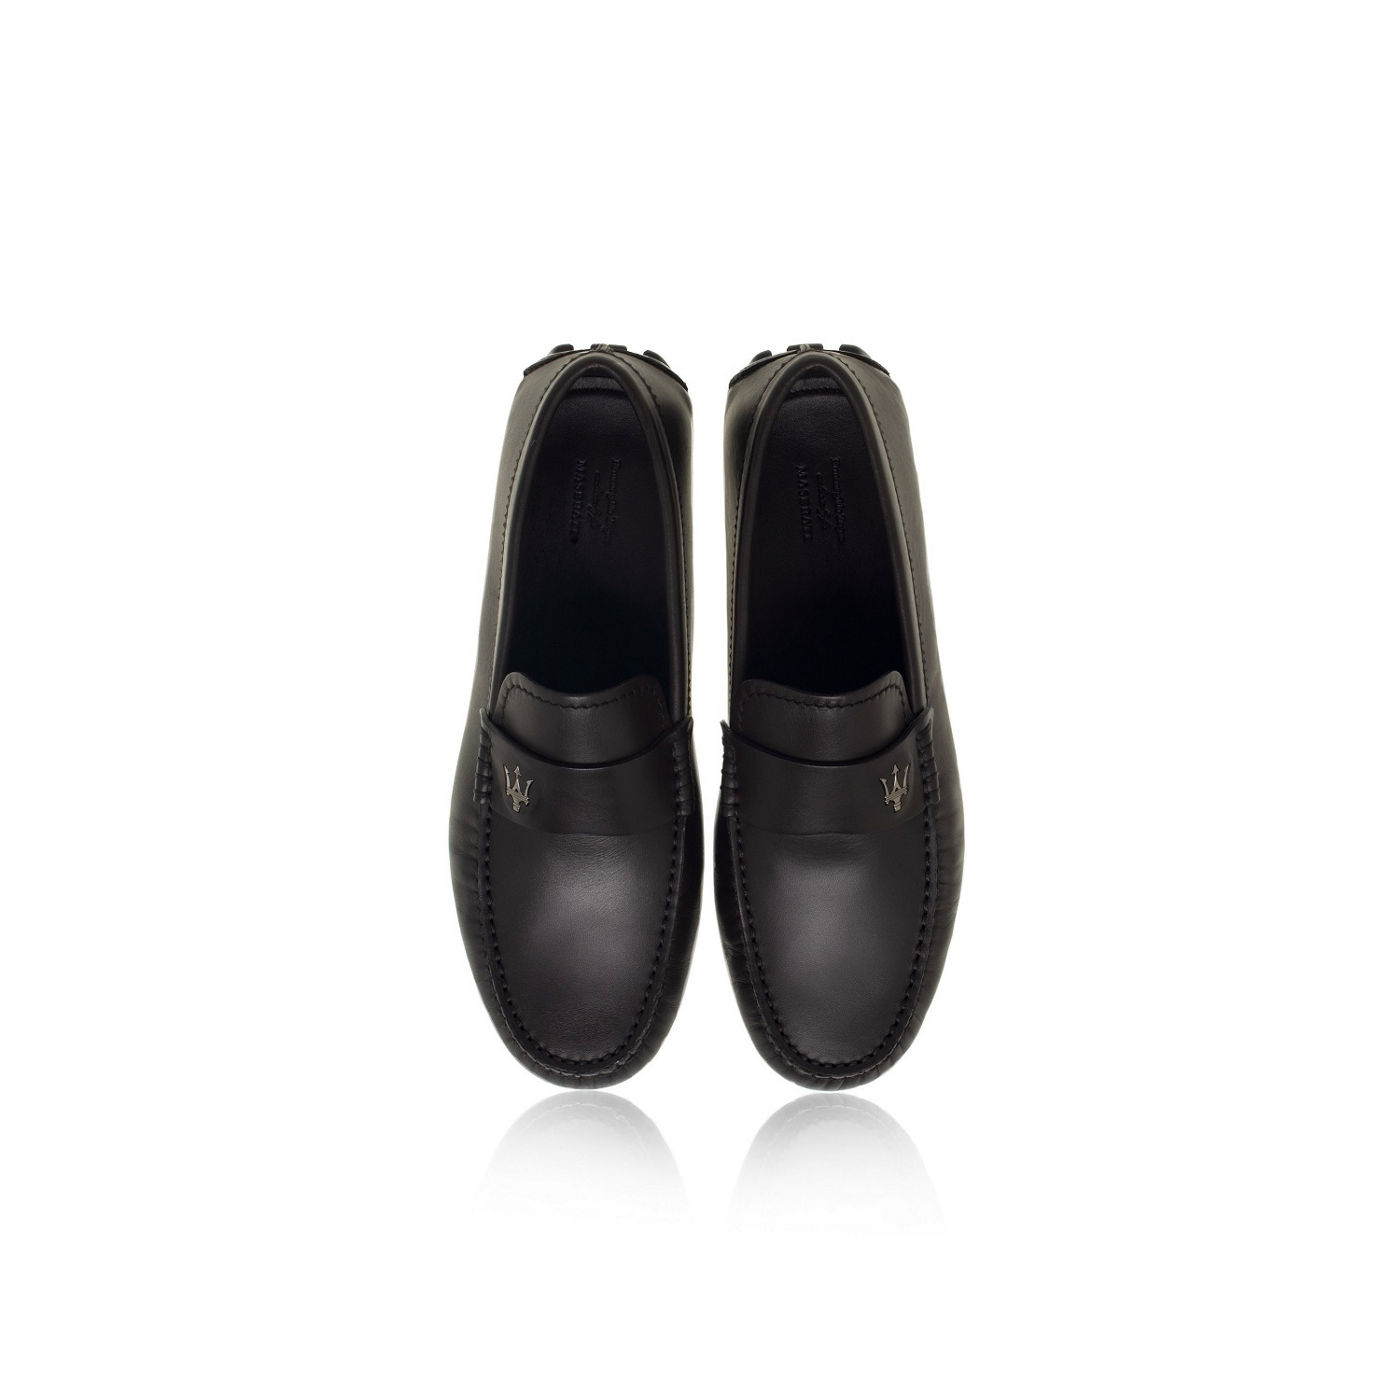 Dark Brown Loafers by Zegna